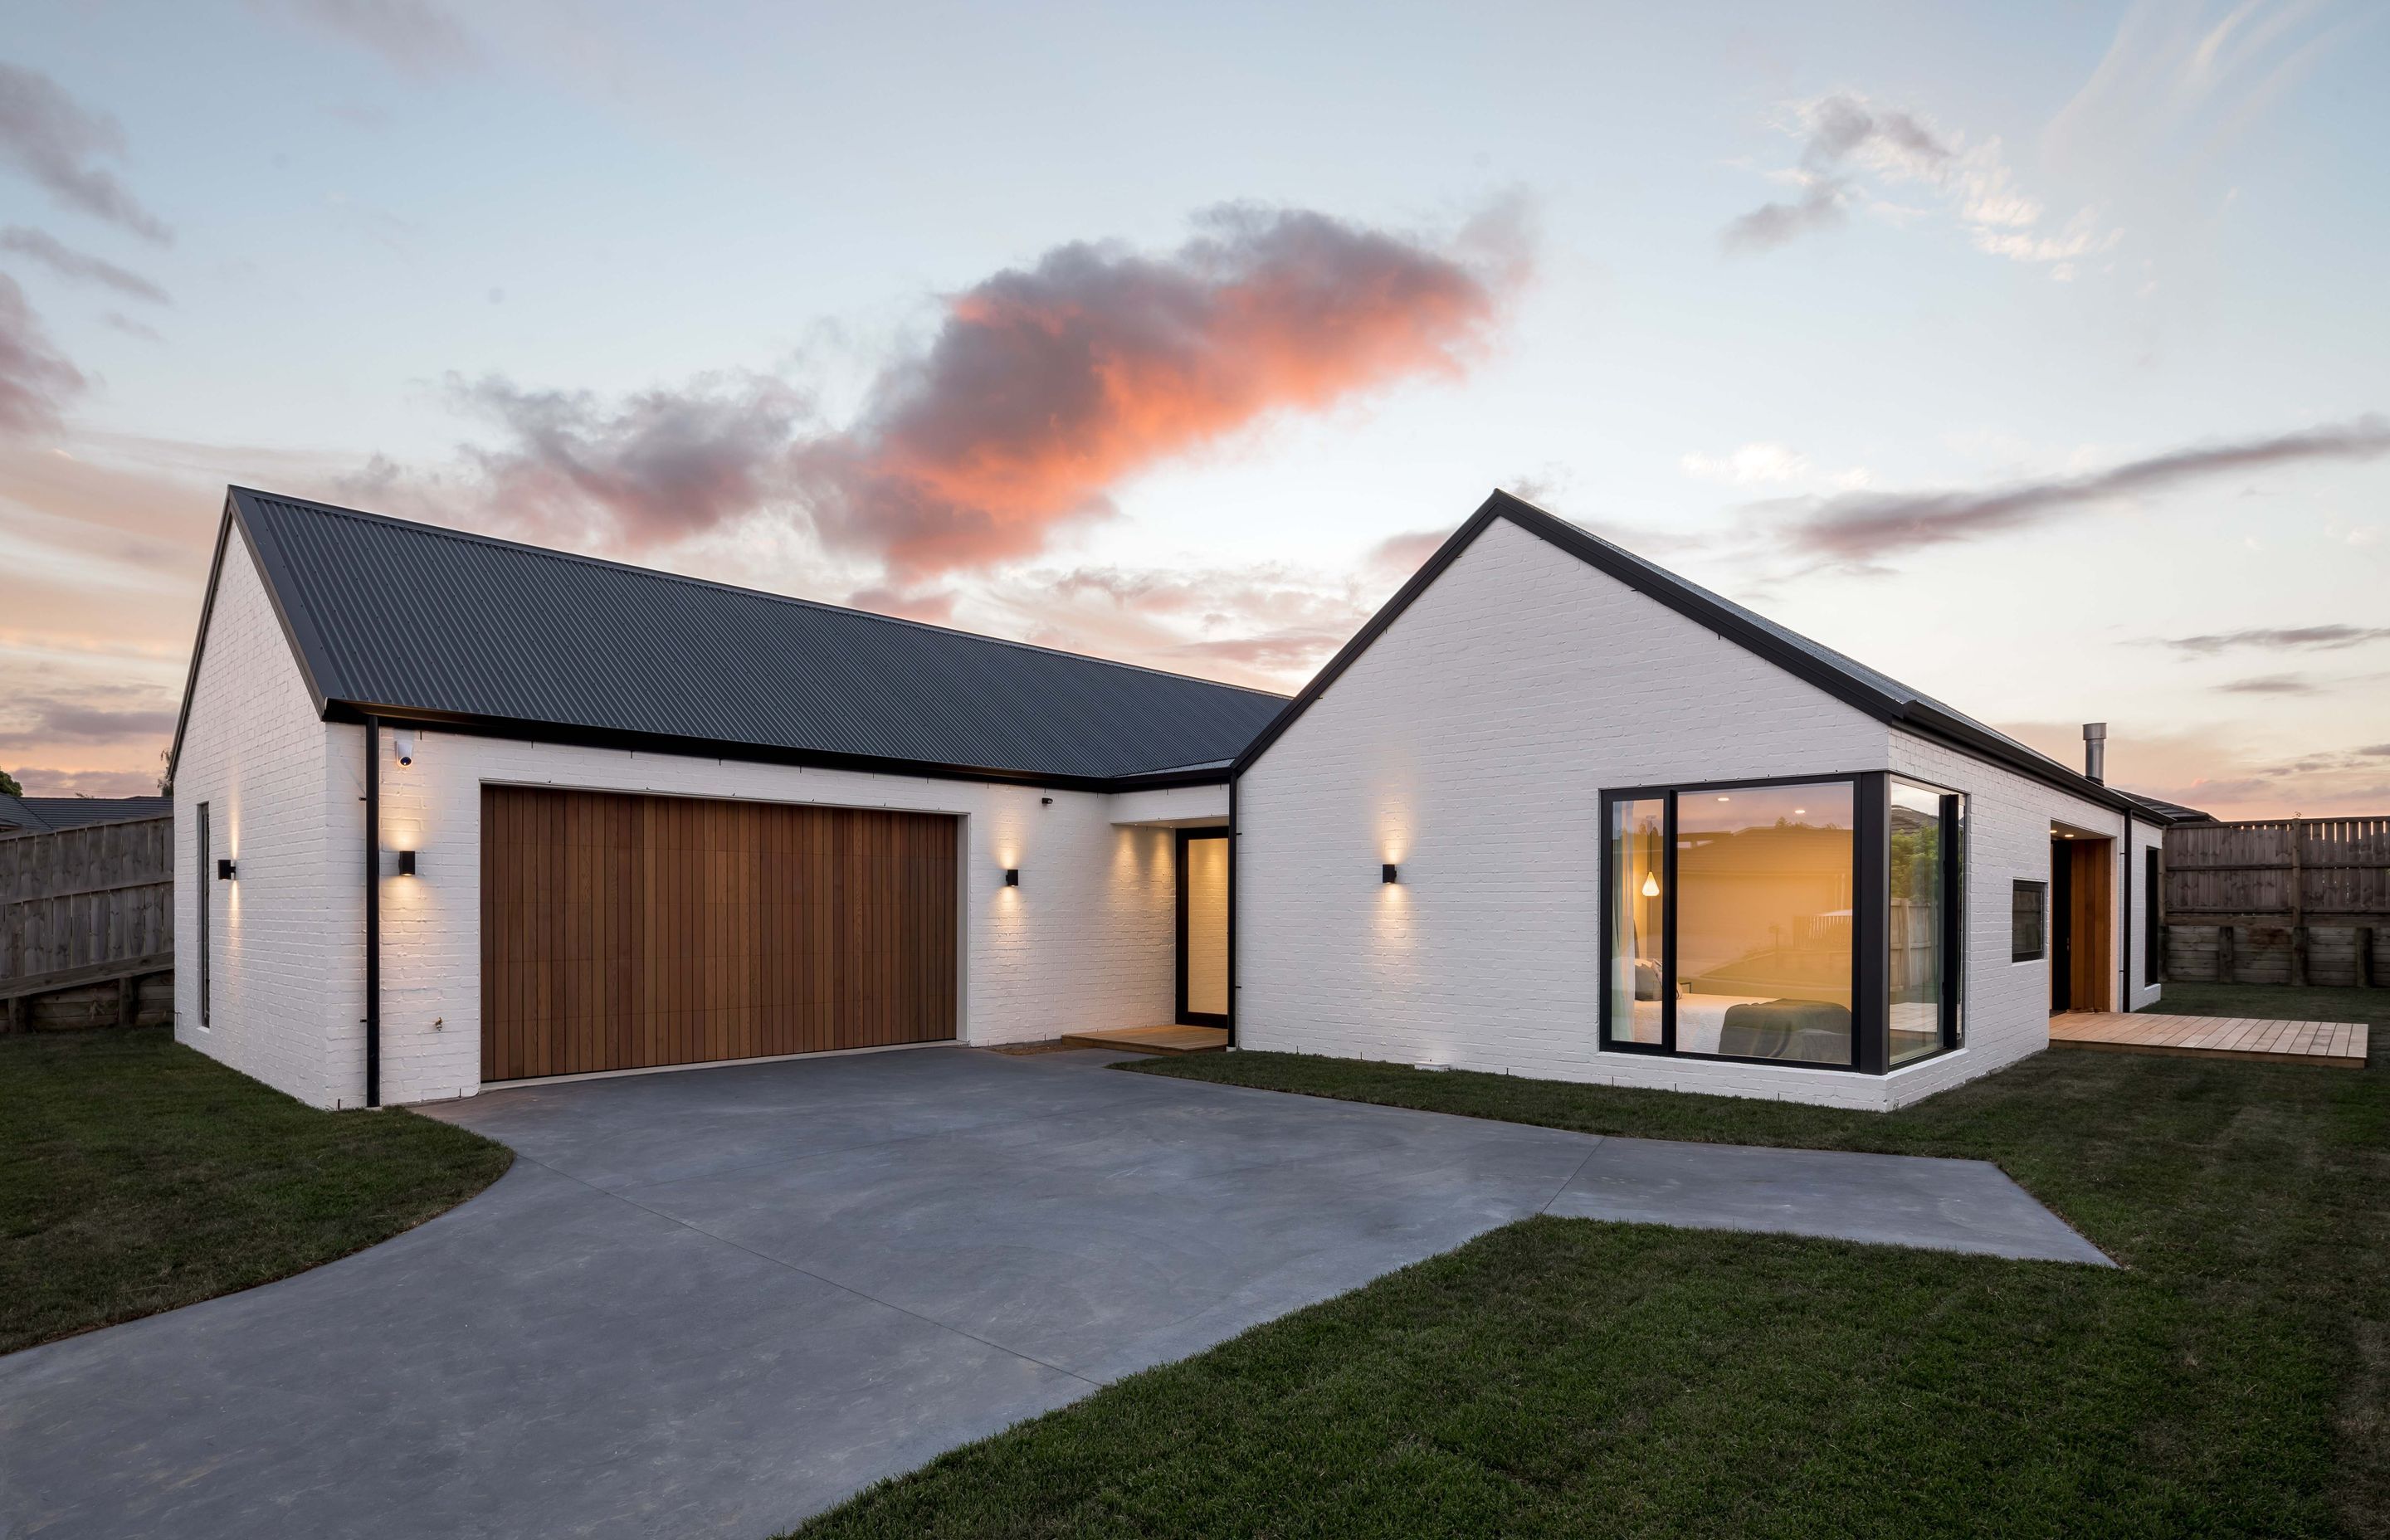 The home sits in the River Terraces subdivision on the outskirts of Ngāruawāhia, Waikato.